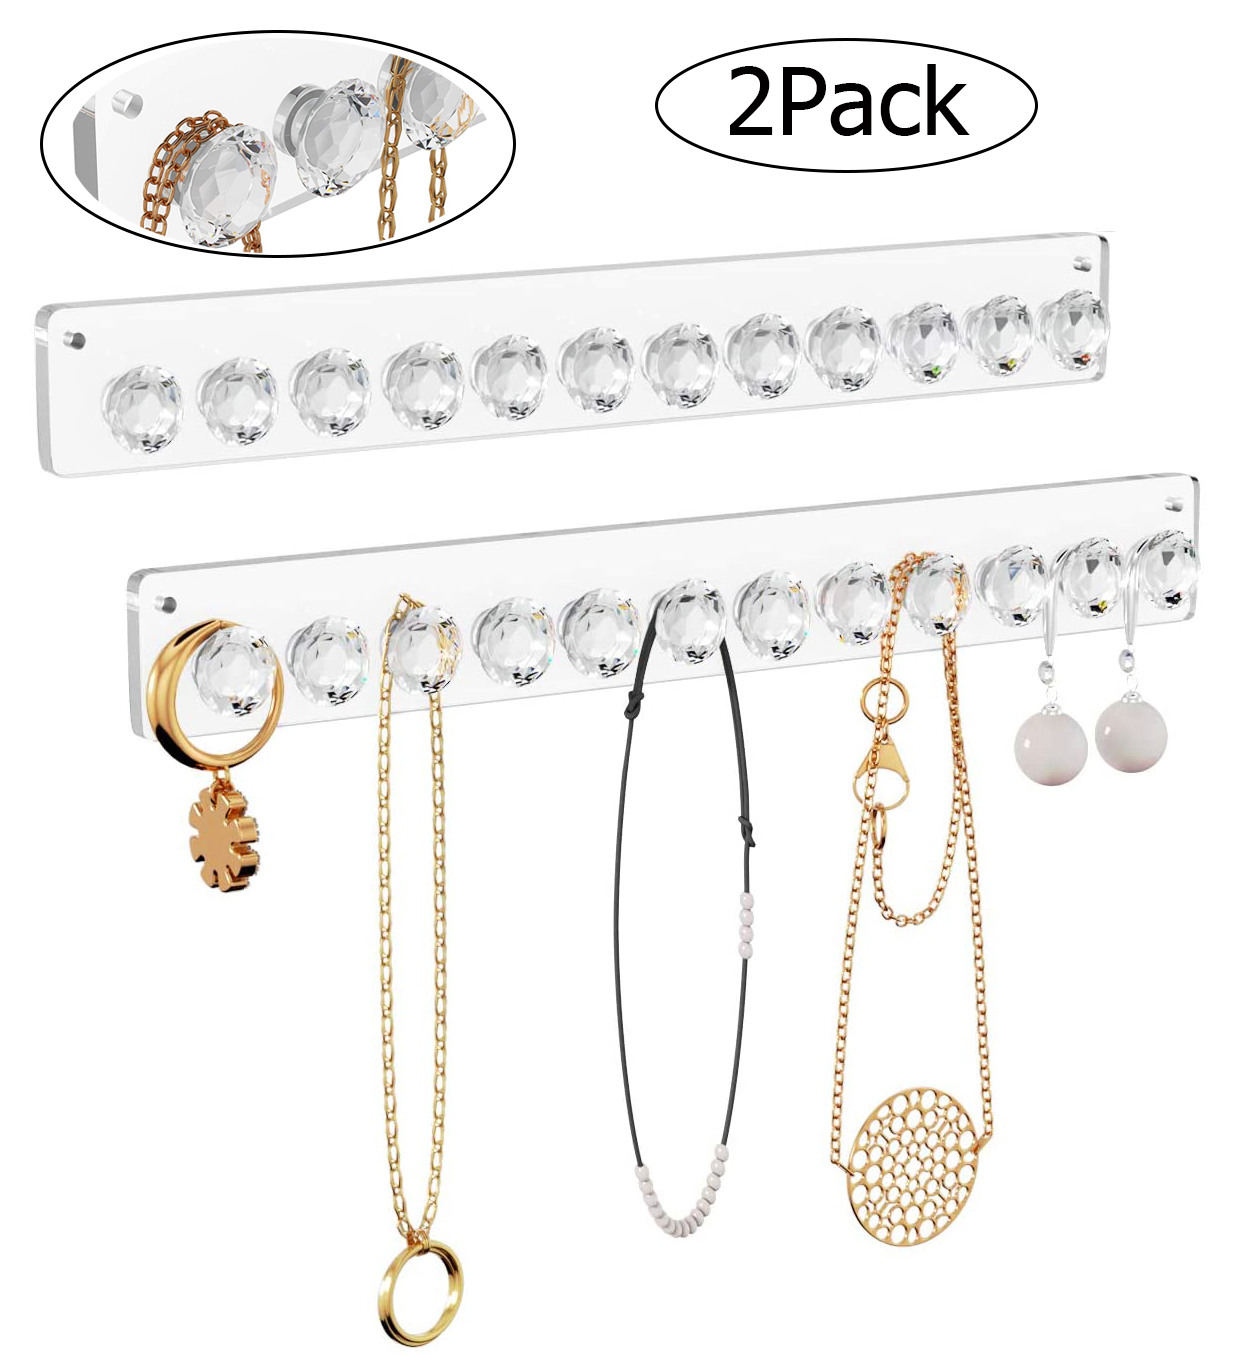 Lnkoo Necklace Hanger, 2 Pack Arylic Necklace Holdr Wall Mounted Jewelry Organizer with 12 Diamond Shape Hooks,Hanging Jewelry Necklace,Best Gift for